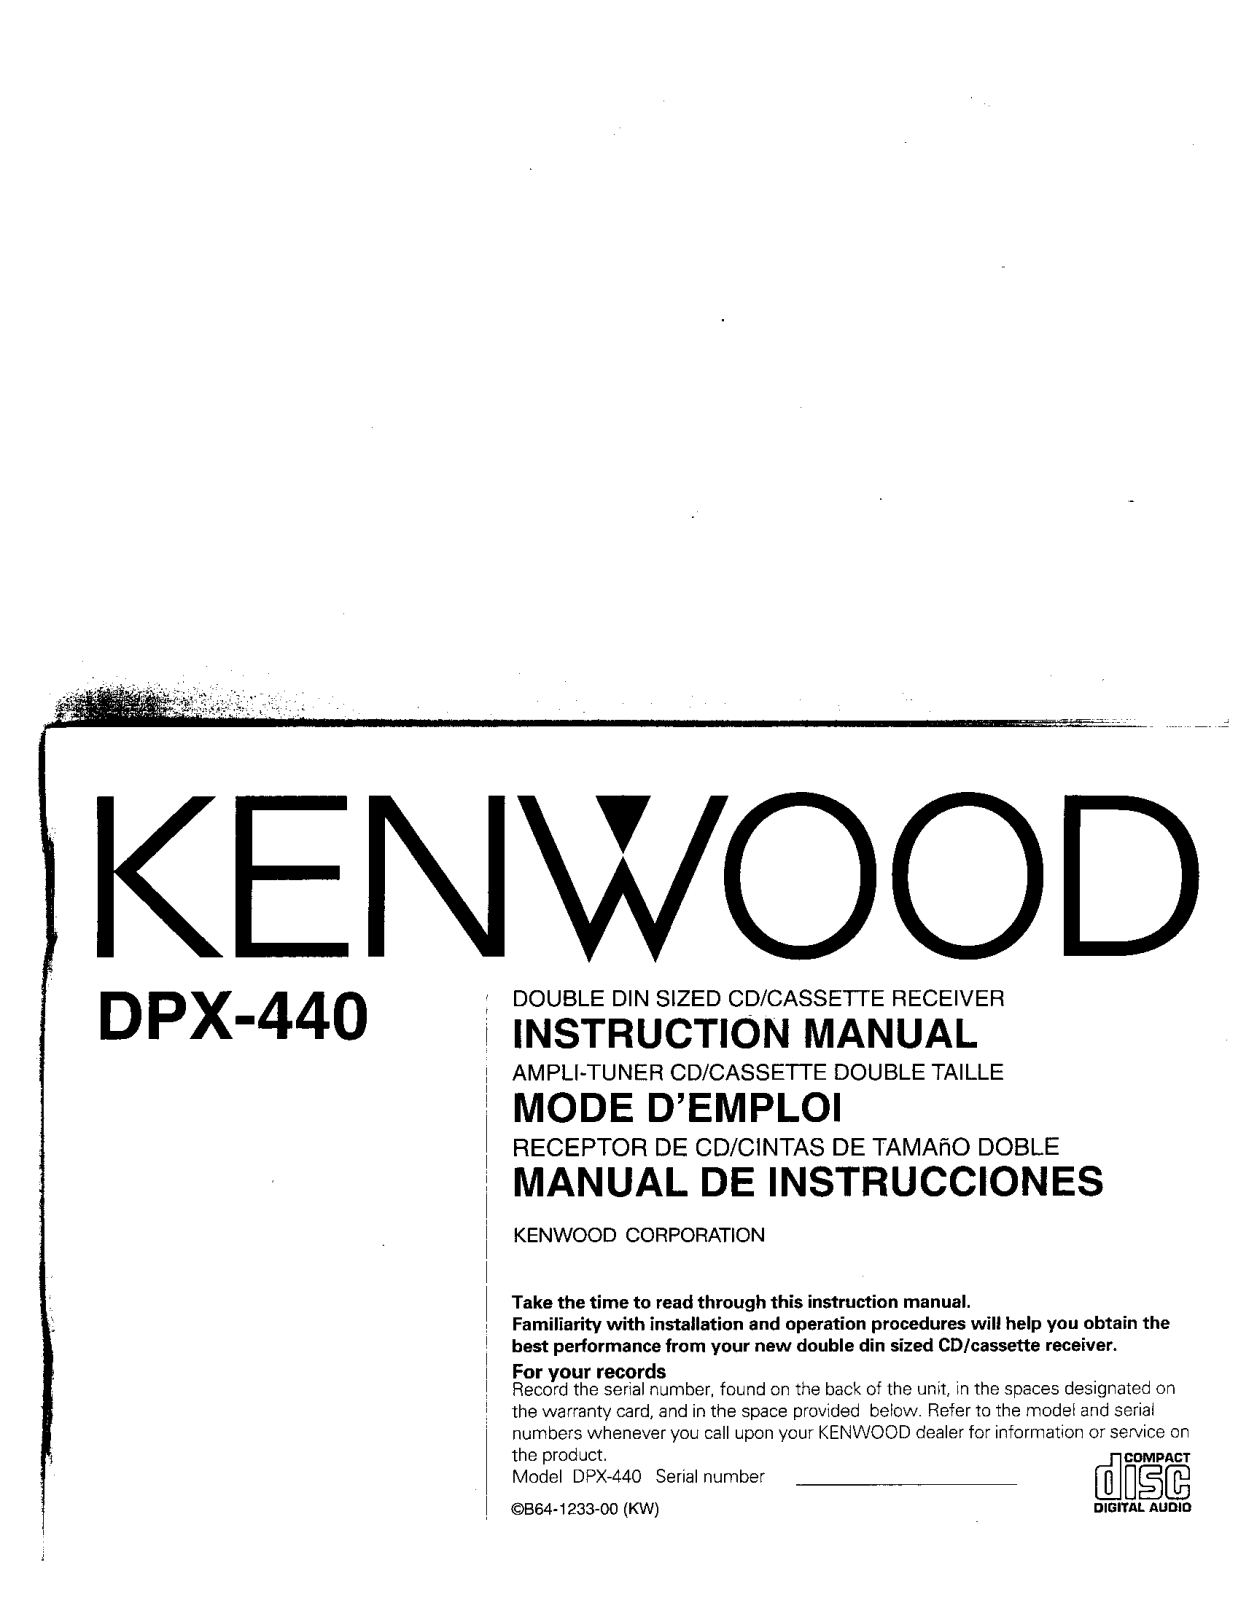 Kenwood DPX-440 Owner's Manual